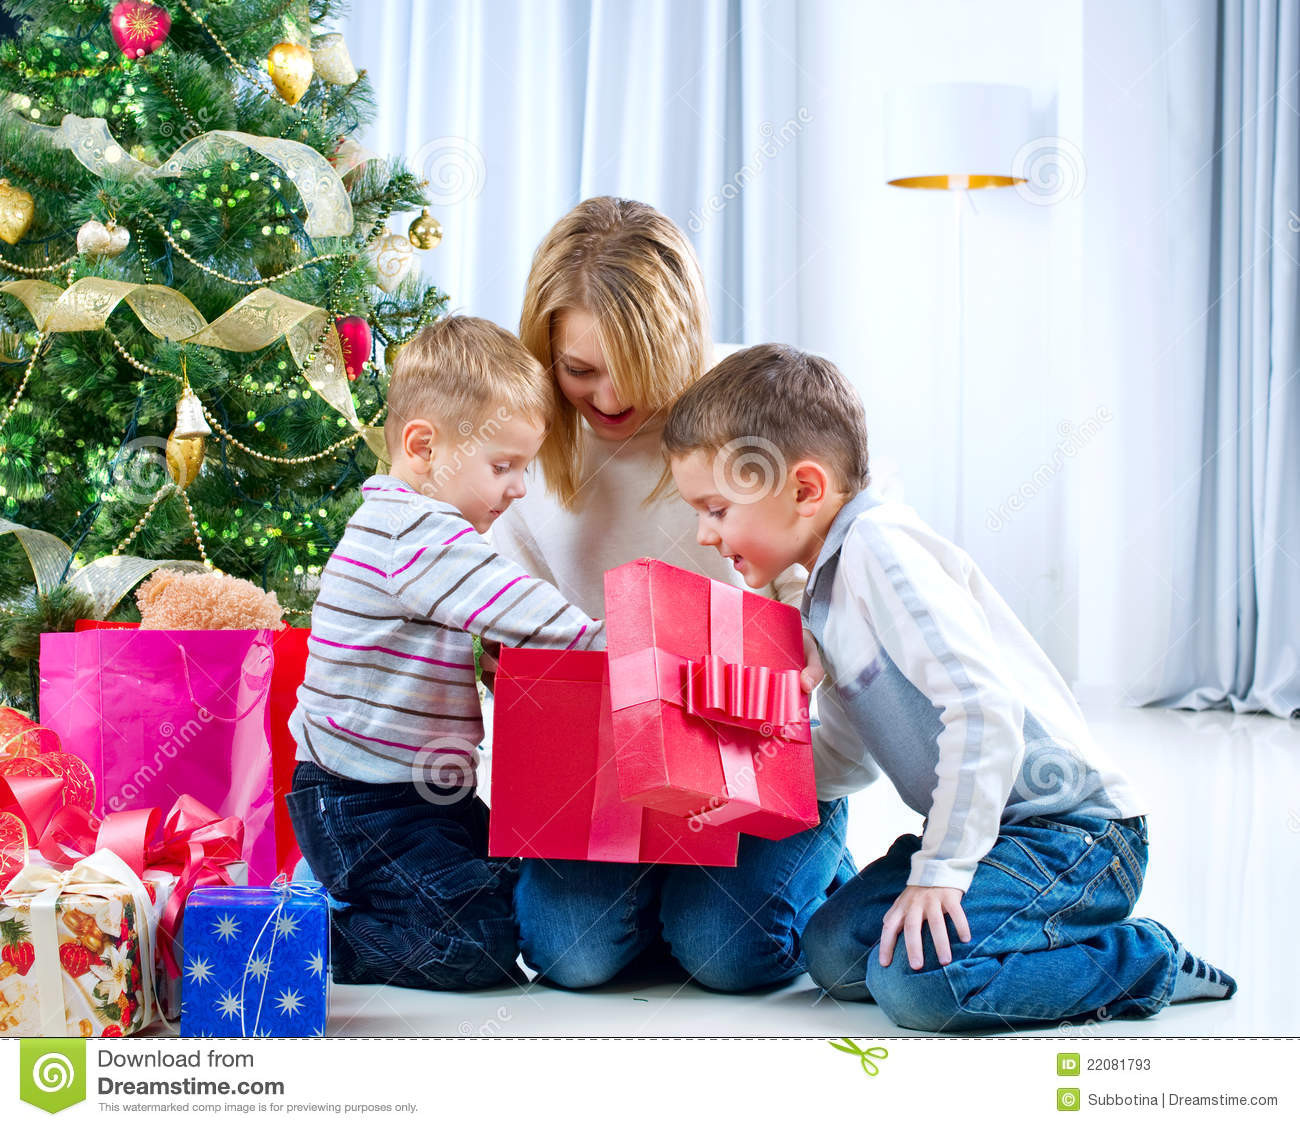 Children Are Gifts
 Happy Kids With Christmas Gifts Stock s Image